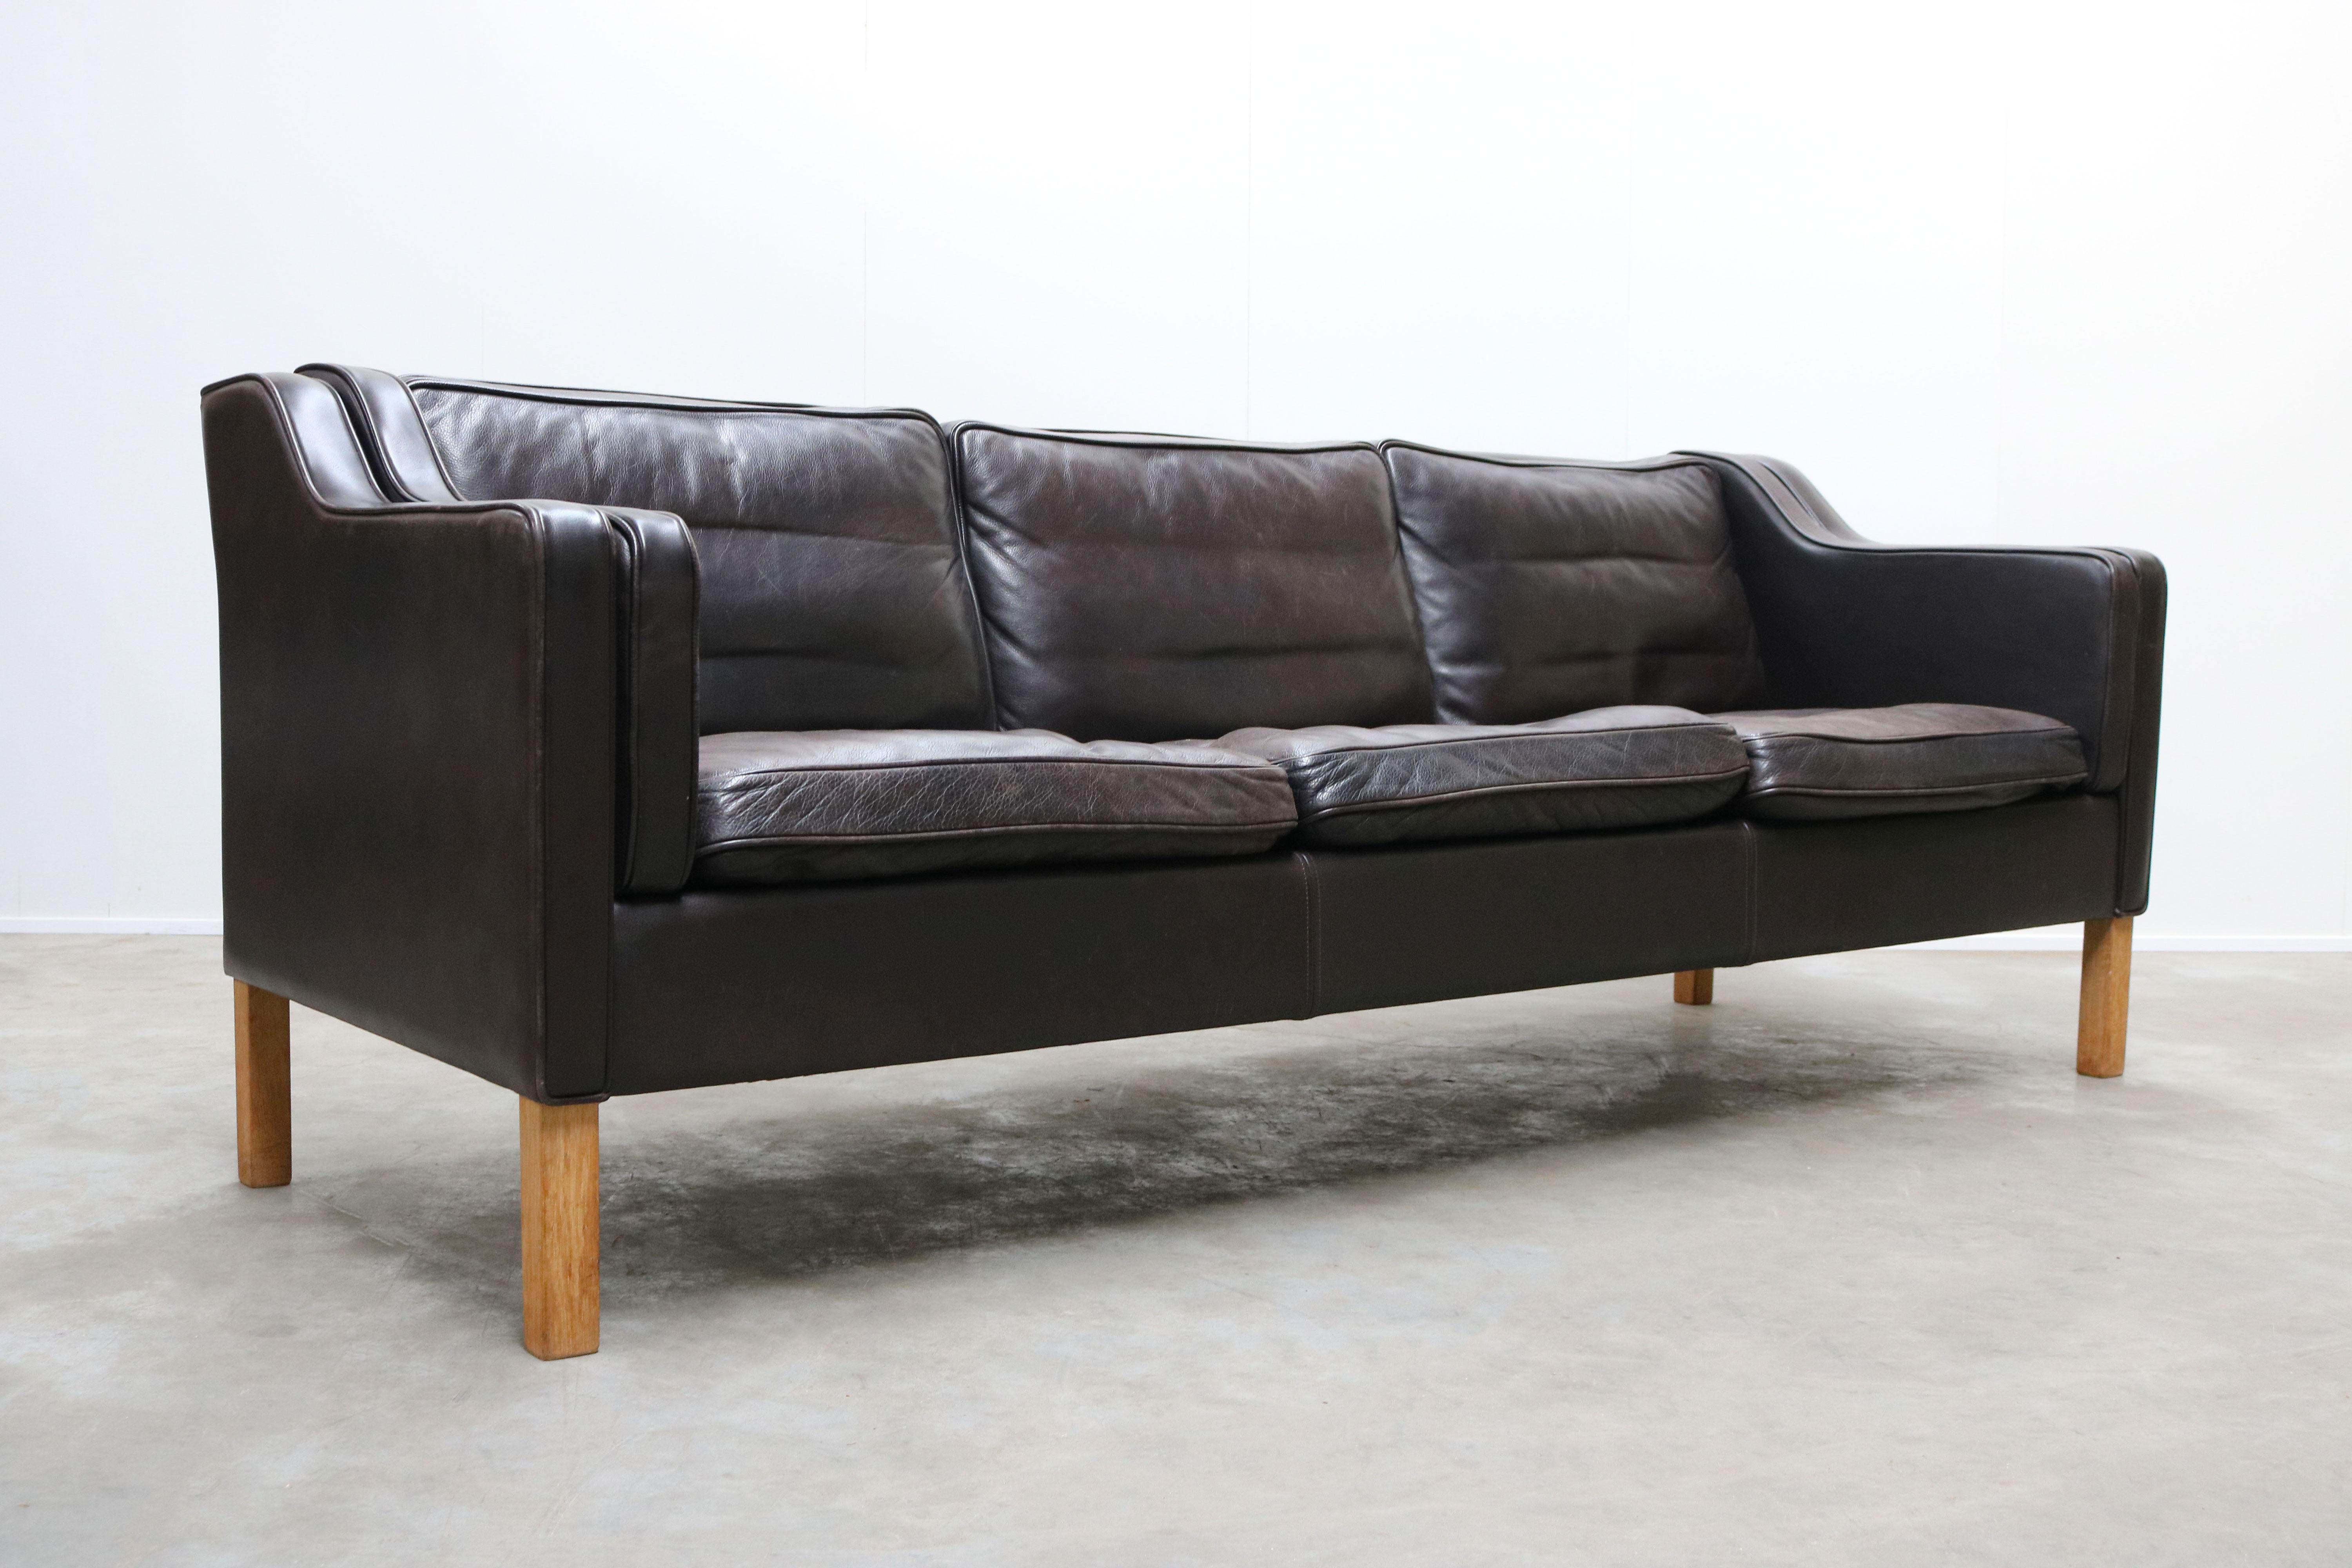 Beautiful vintage example of the classic three-seat sofa designed by Børge Mogensen for Fredericia, model 2213. Sides, back and loose cushions upholstered with black patinated leather. Solid oak legs. Seat cushions with foam, side and back cushions